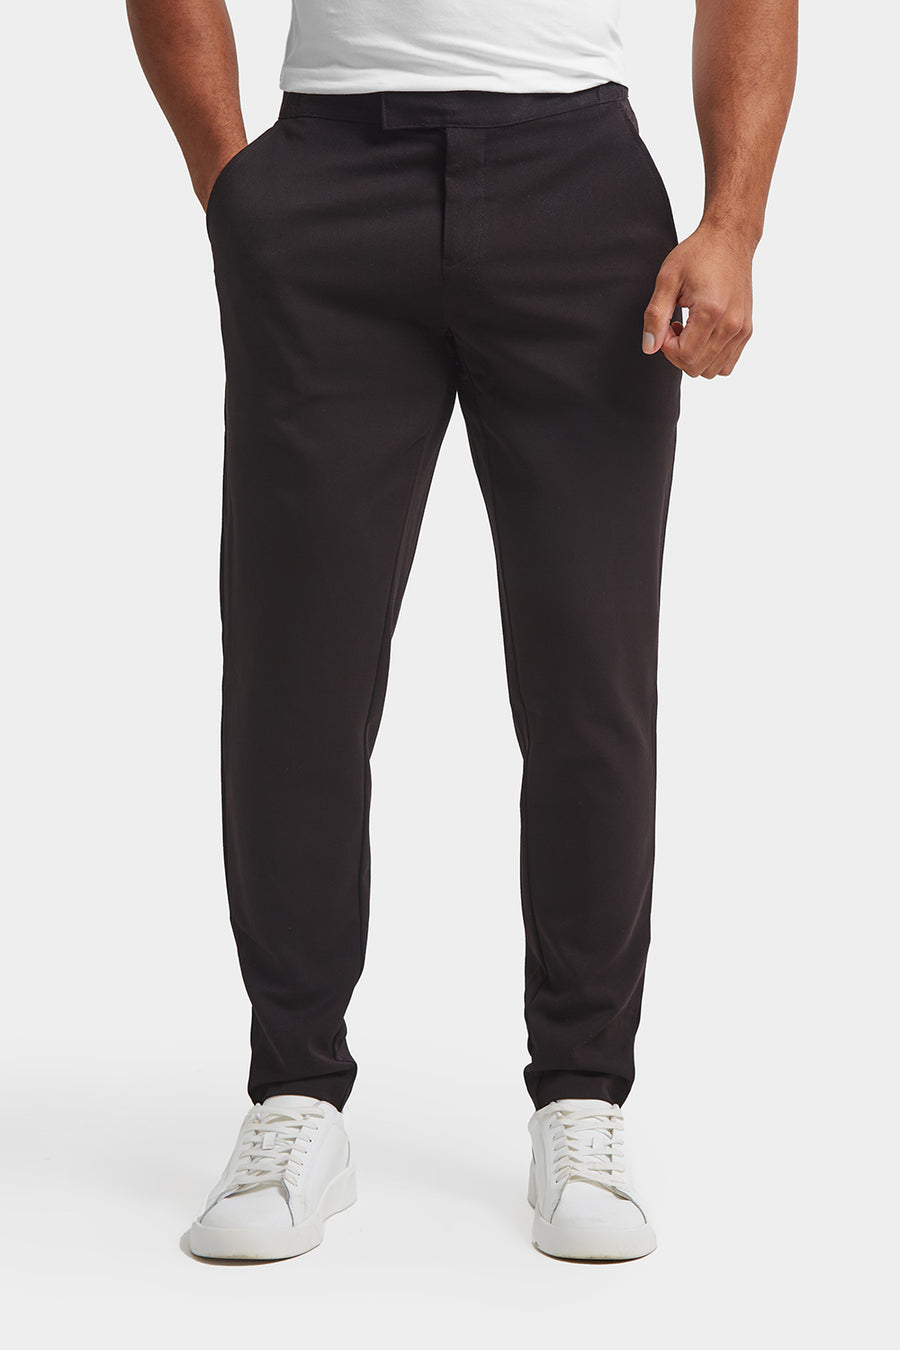 Cropped Pleated Pants in Black - TAILORED ATHLETE - USA